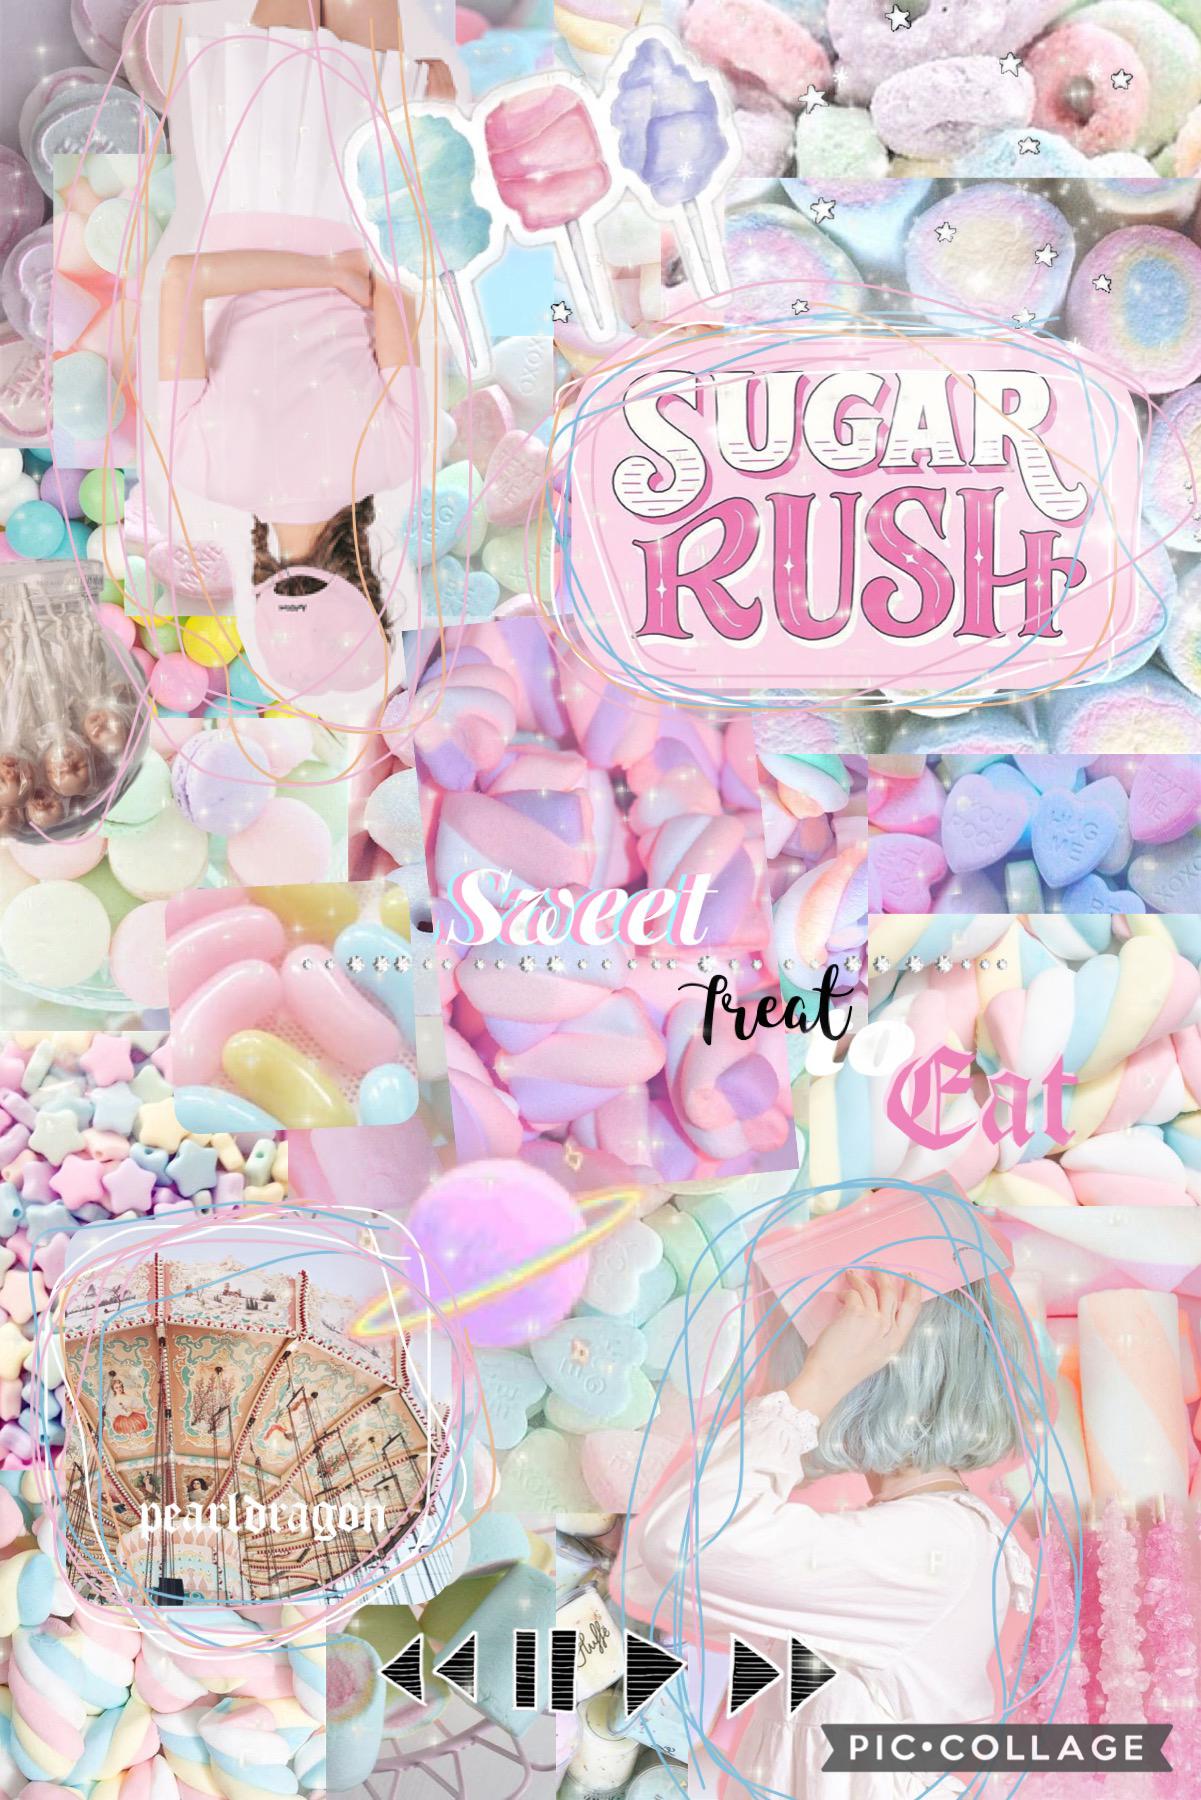 🍭tap🍭
Hi pearls! What do you think about this one? I love the candy vibes but I don’t know about the lettering. 